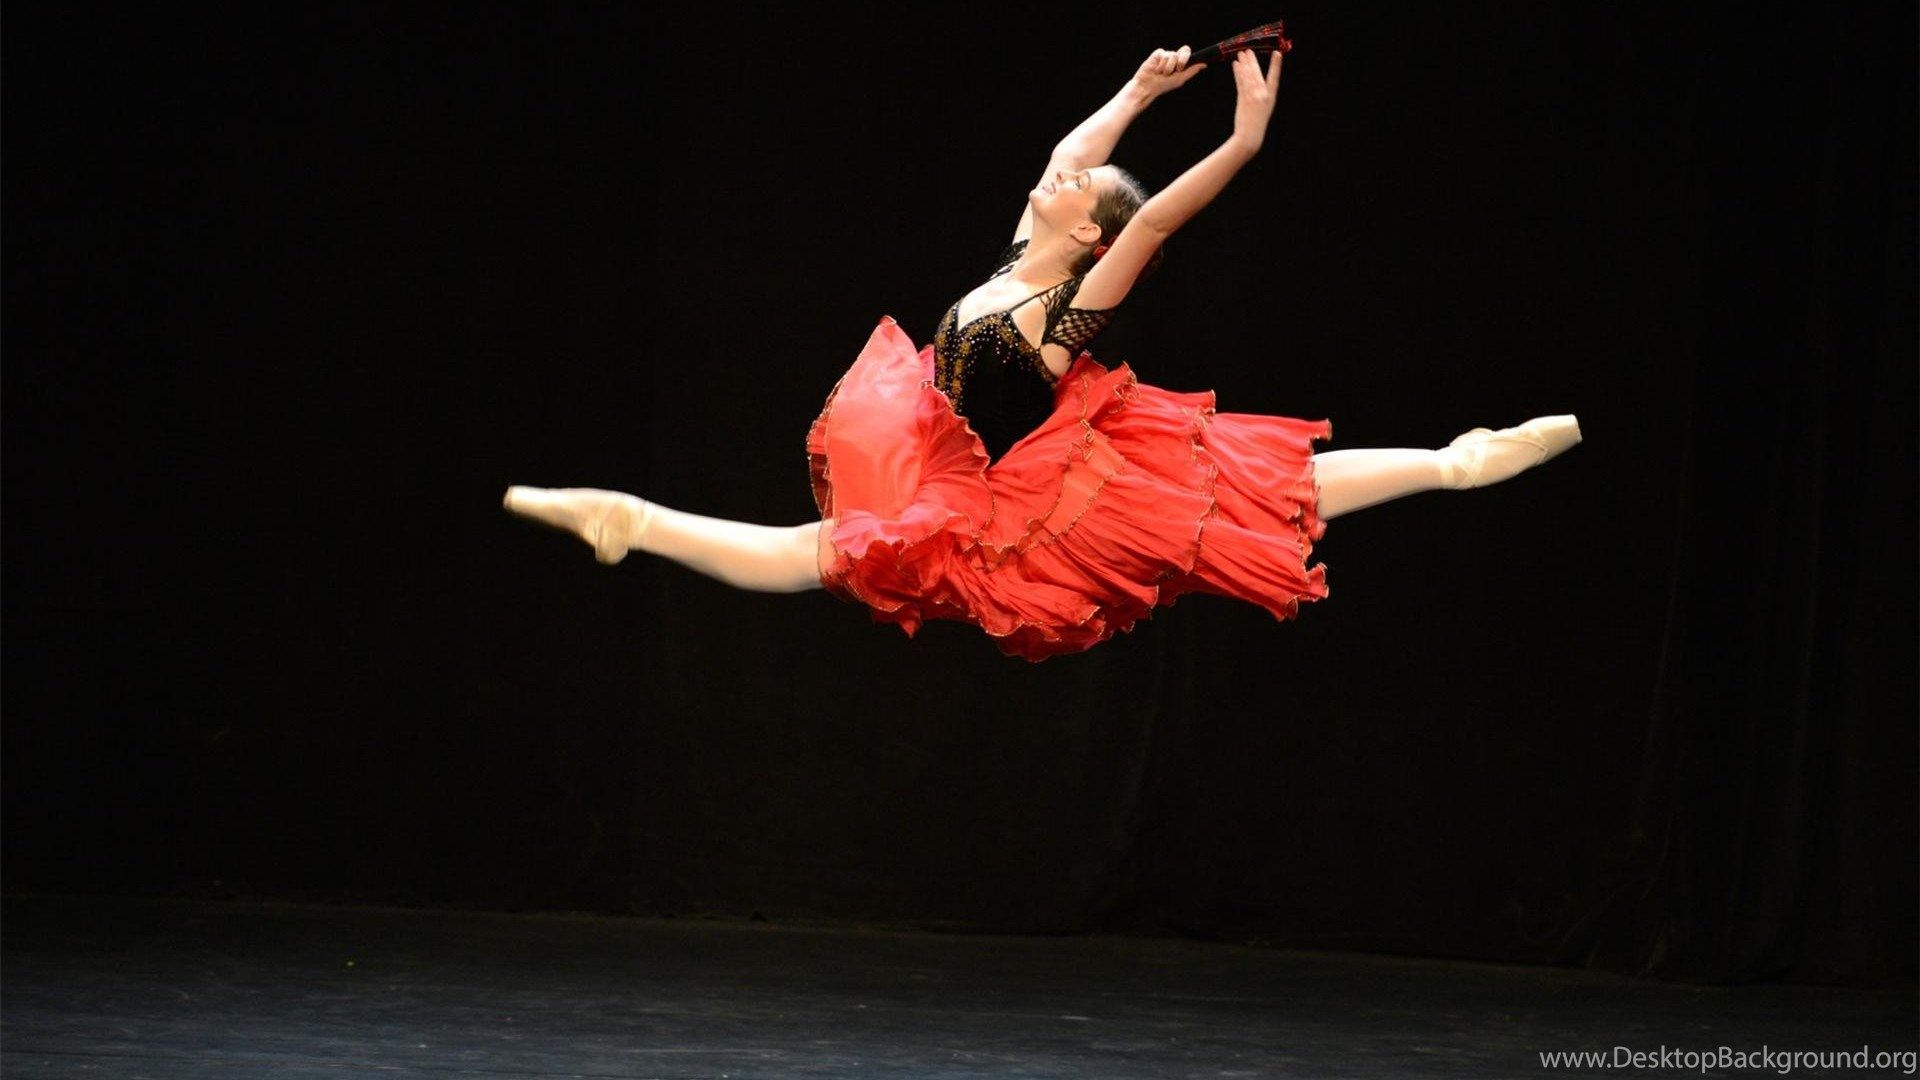 A ballerina in a red dress leaps into the air. - Dance